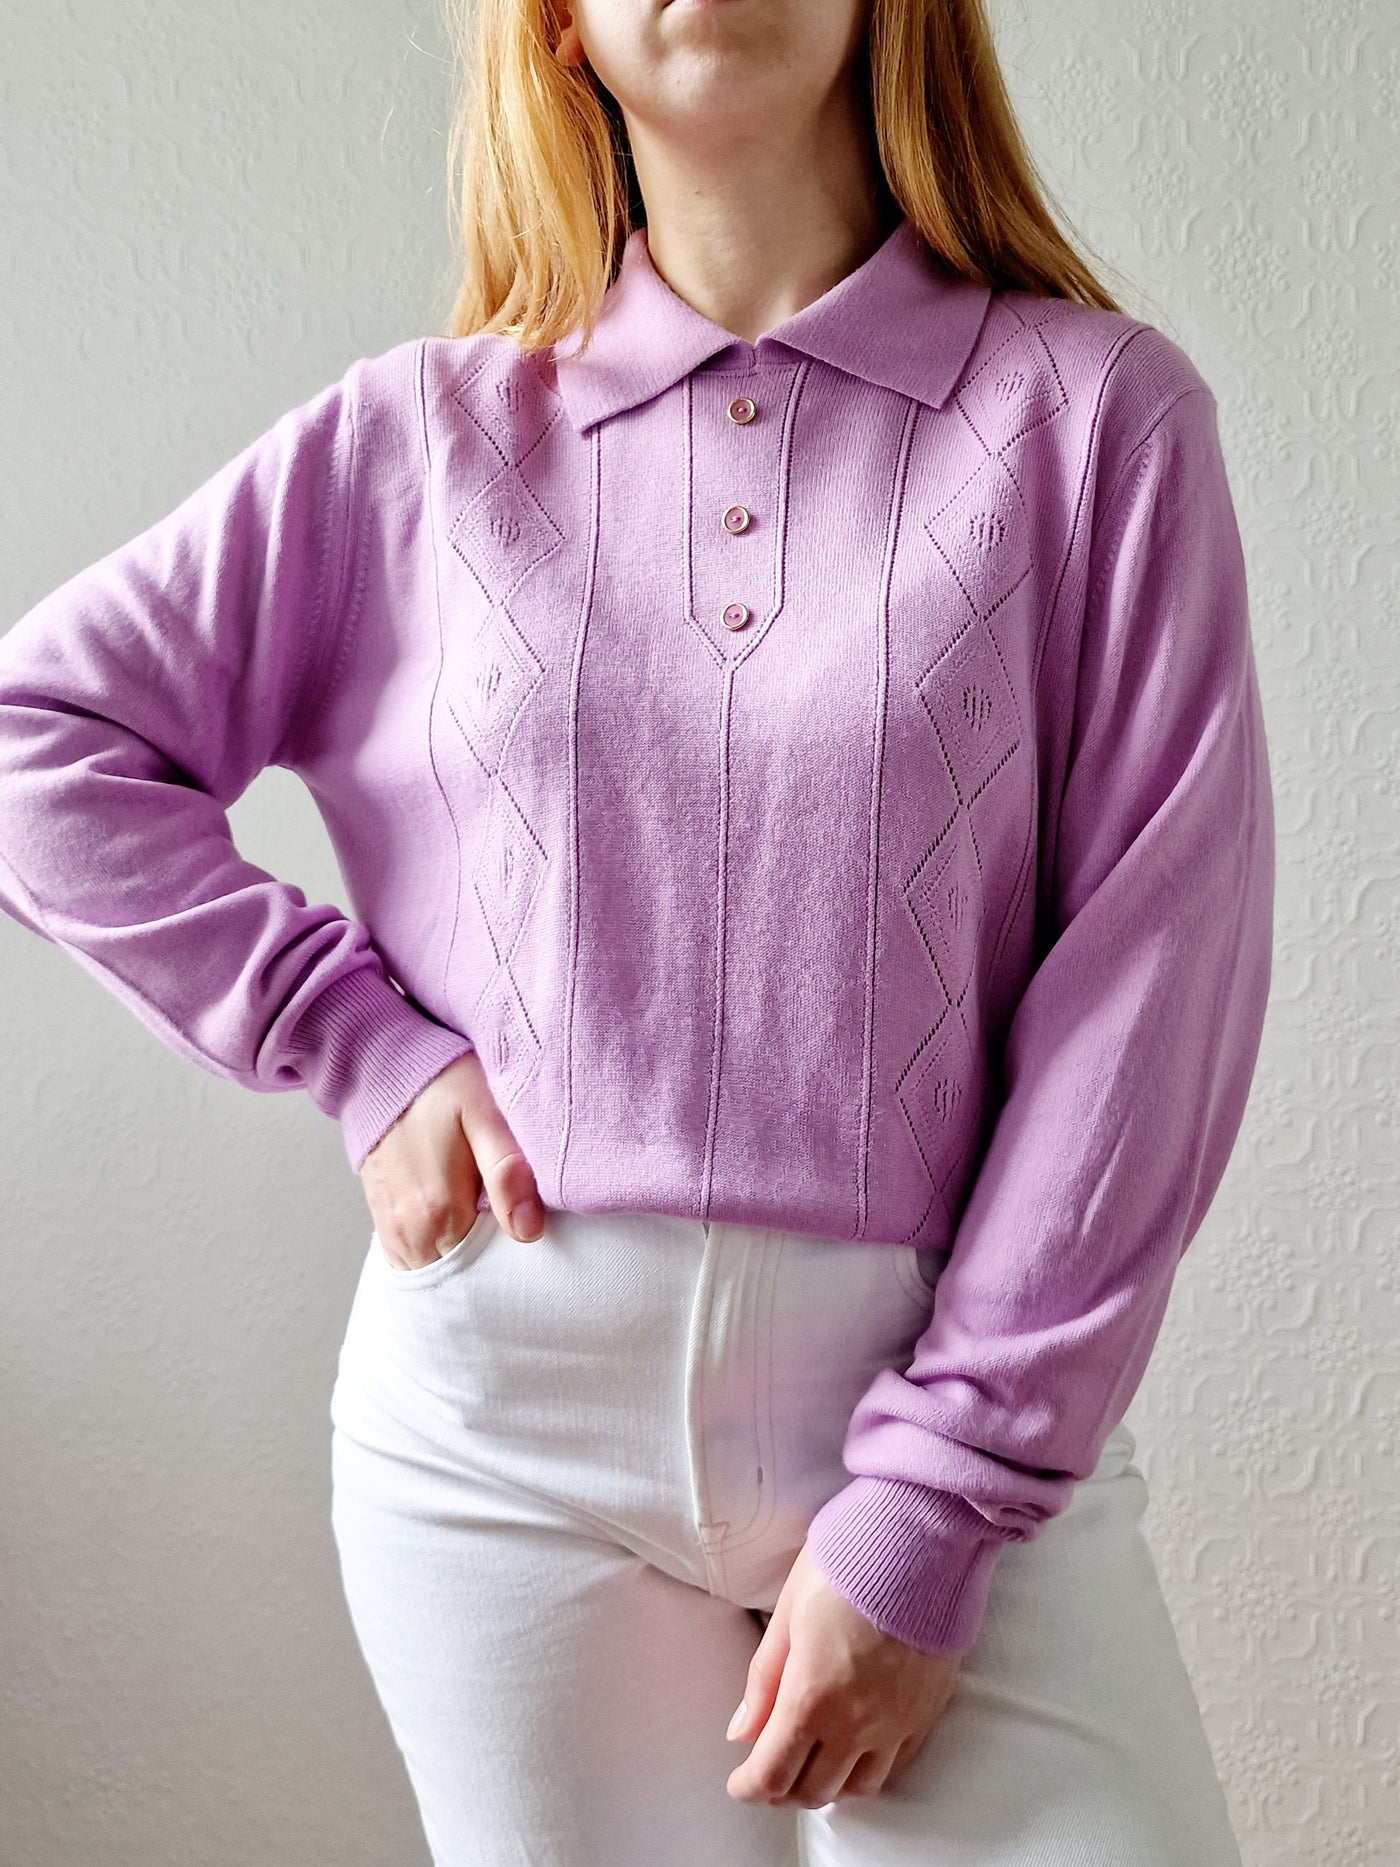 Vintage Mauve Polo Style Long Sleeve Knit Top with Collared Neck - M/L